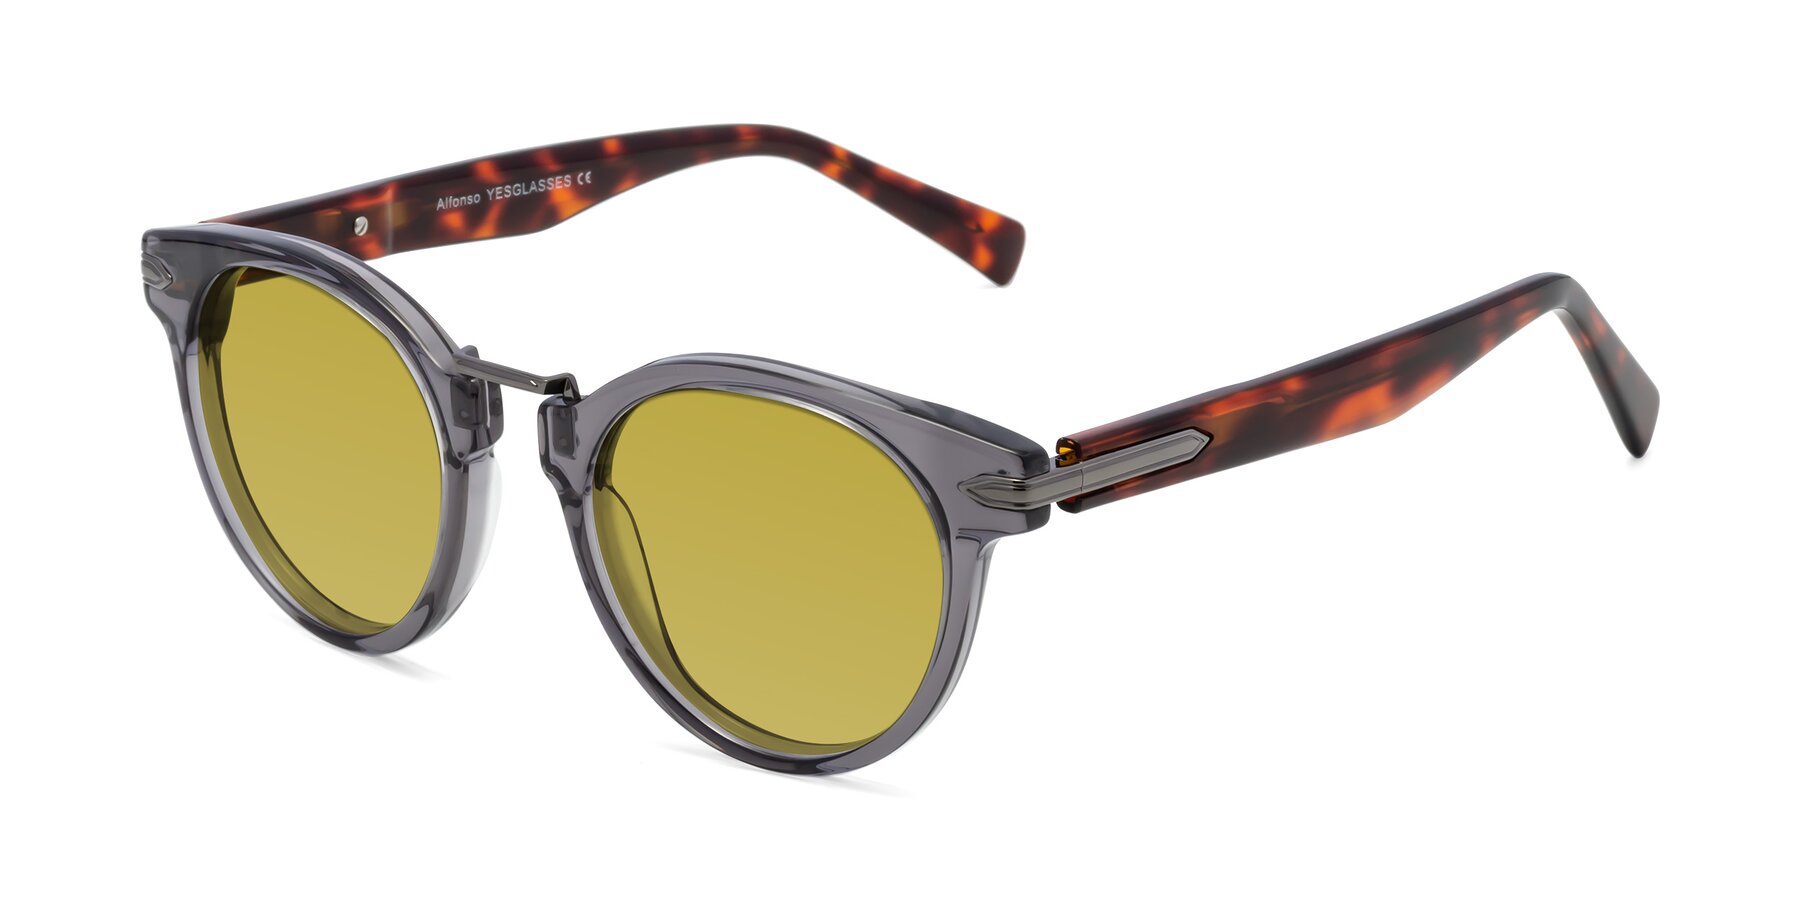 Angle of Alfonso in Gray /Tortoise with Champagne Tinted Lenses